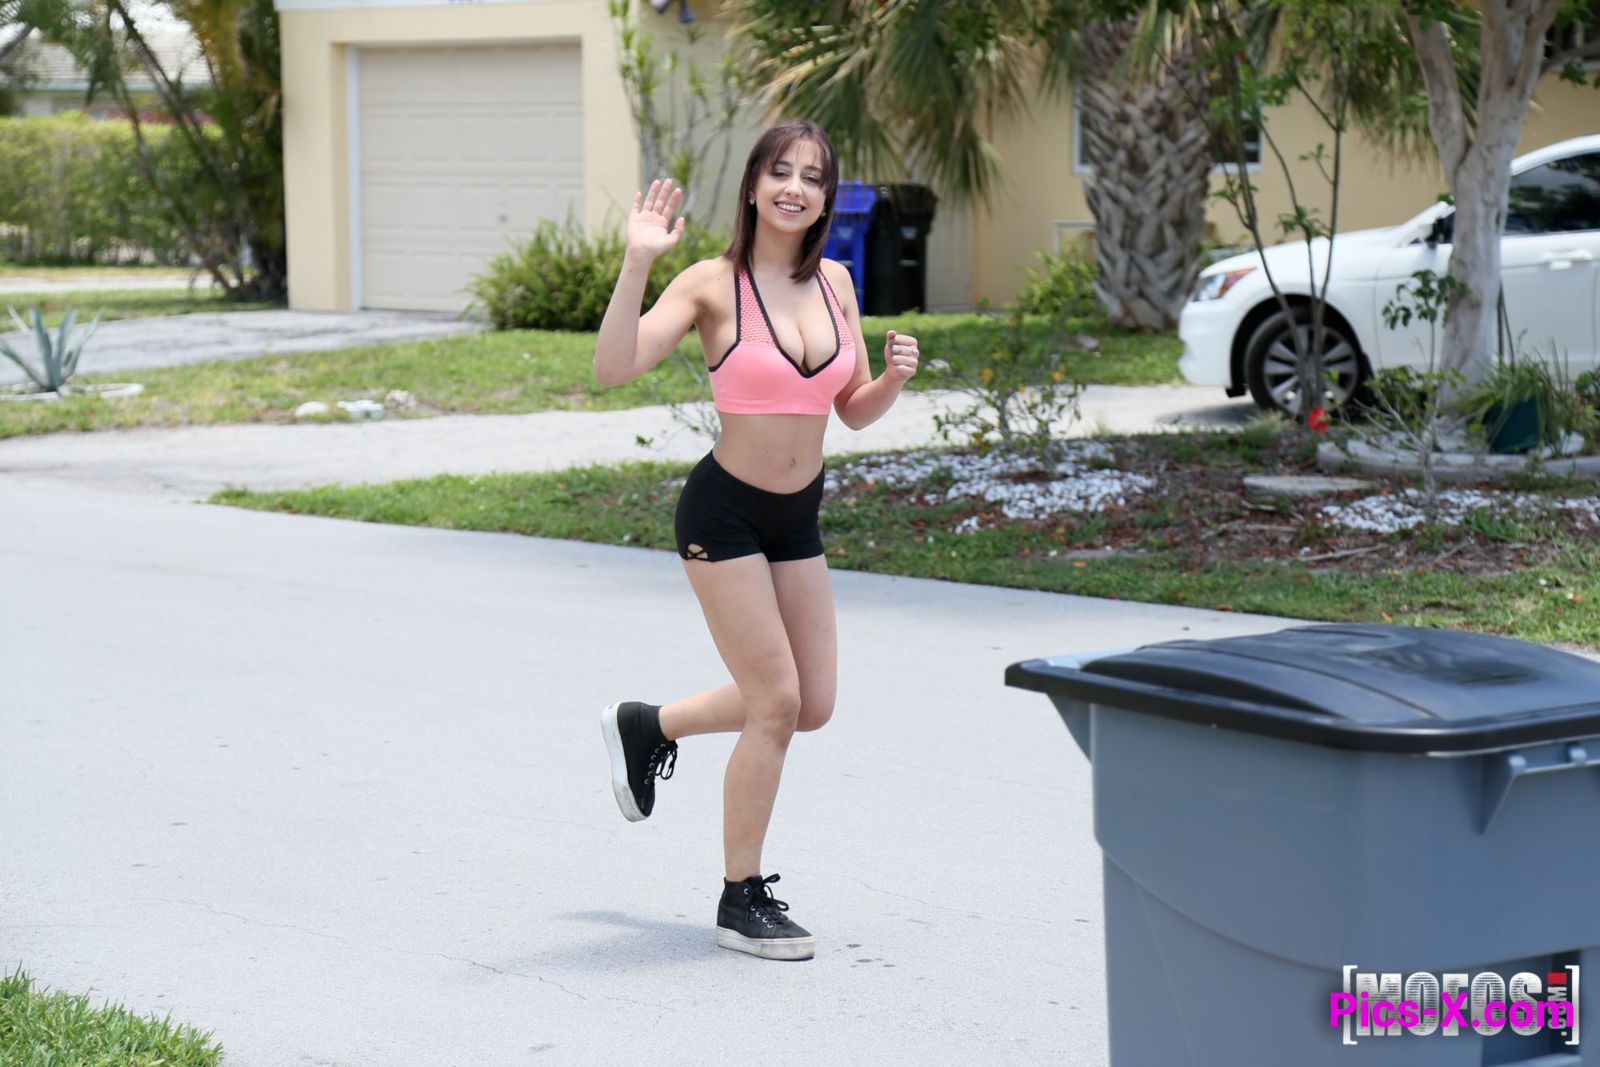 Hot Teen Gets Recycled - I Know That Girl - Image 1